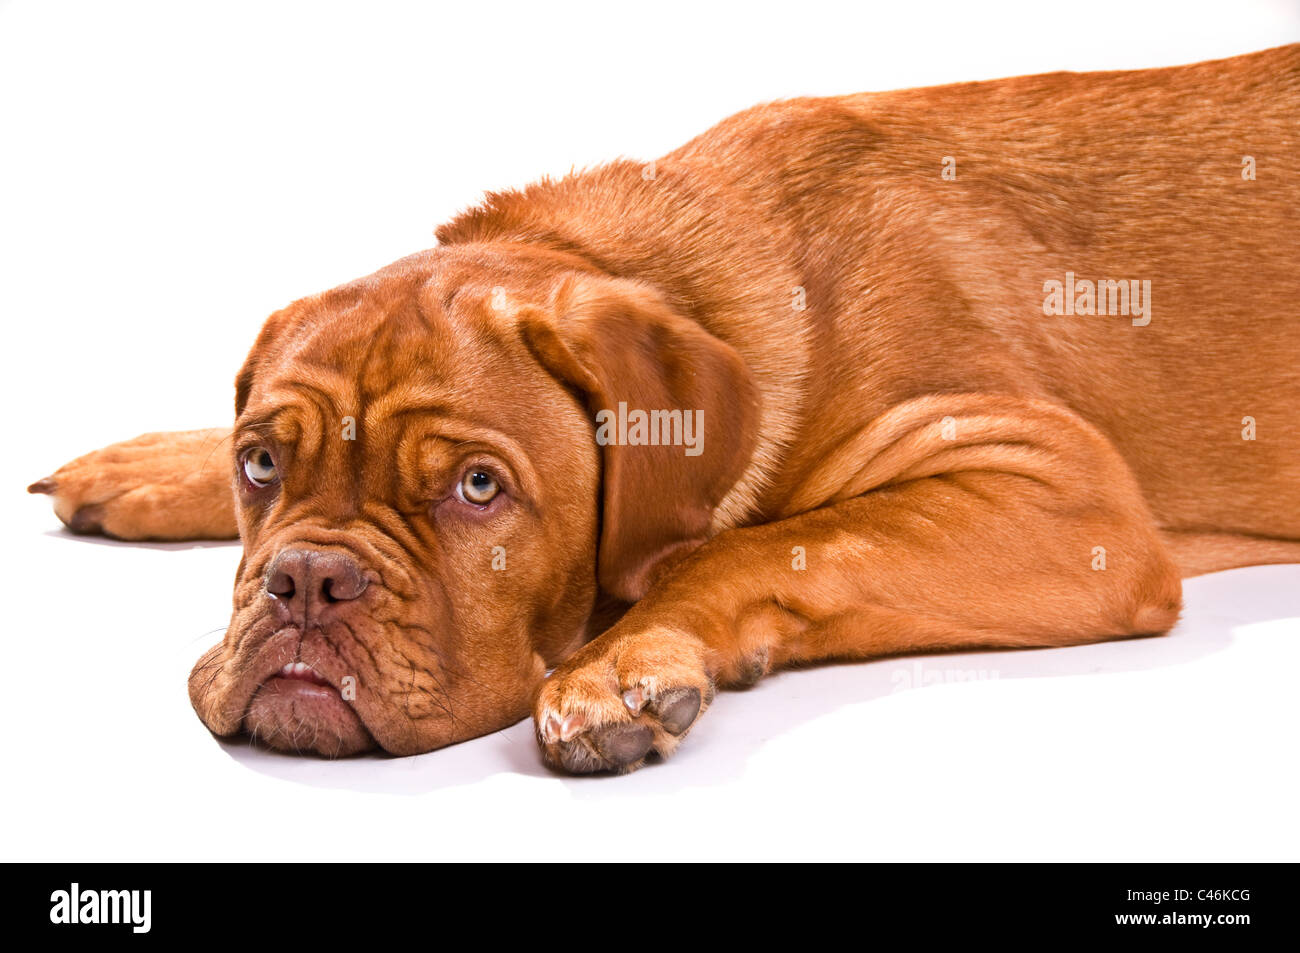 Adorable chiot lying looking at camera Banque D'Images